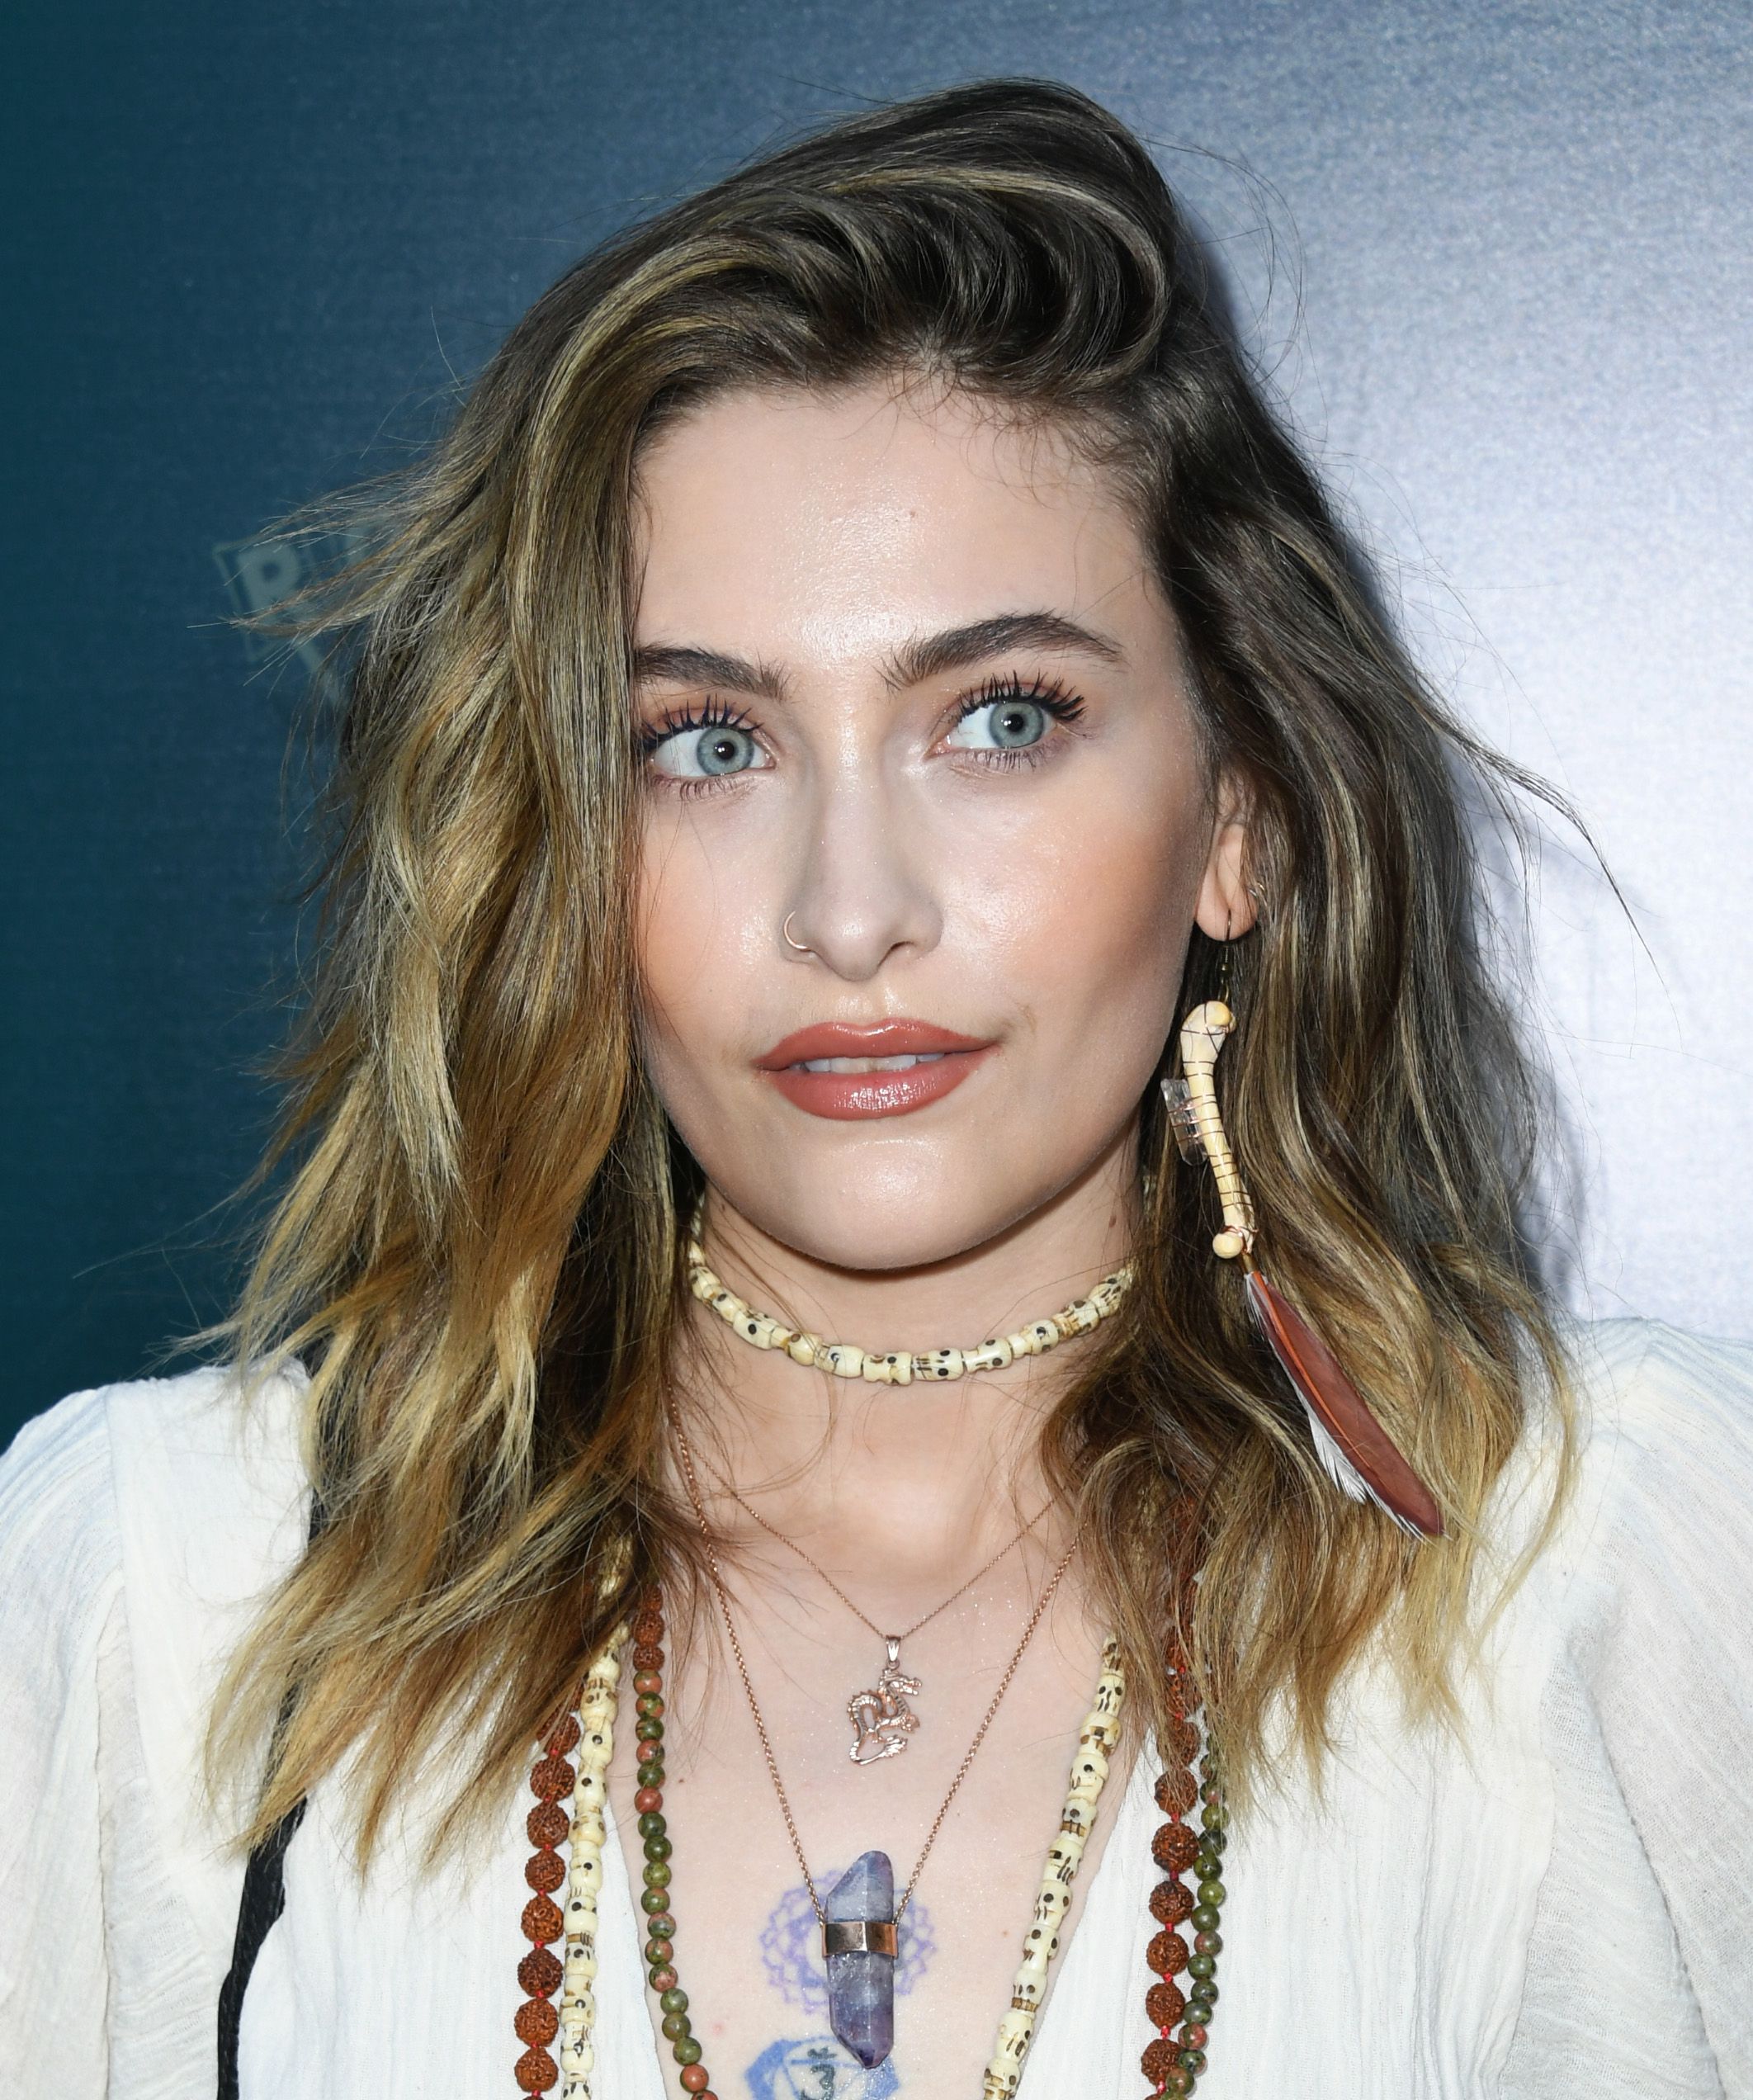 Paris Jackson at the LA Special Screening Of "The Peanut Butter Falcon" at ArcLight Hollywood on August 01, 2019 in Hollywood, California. | Photo: Getty Images